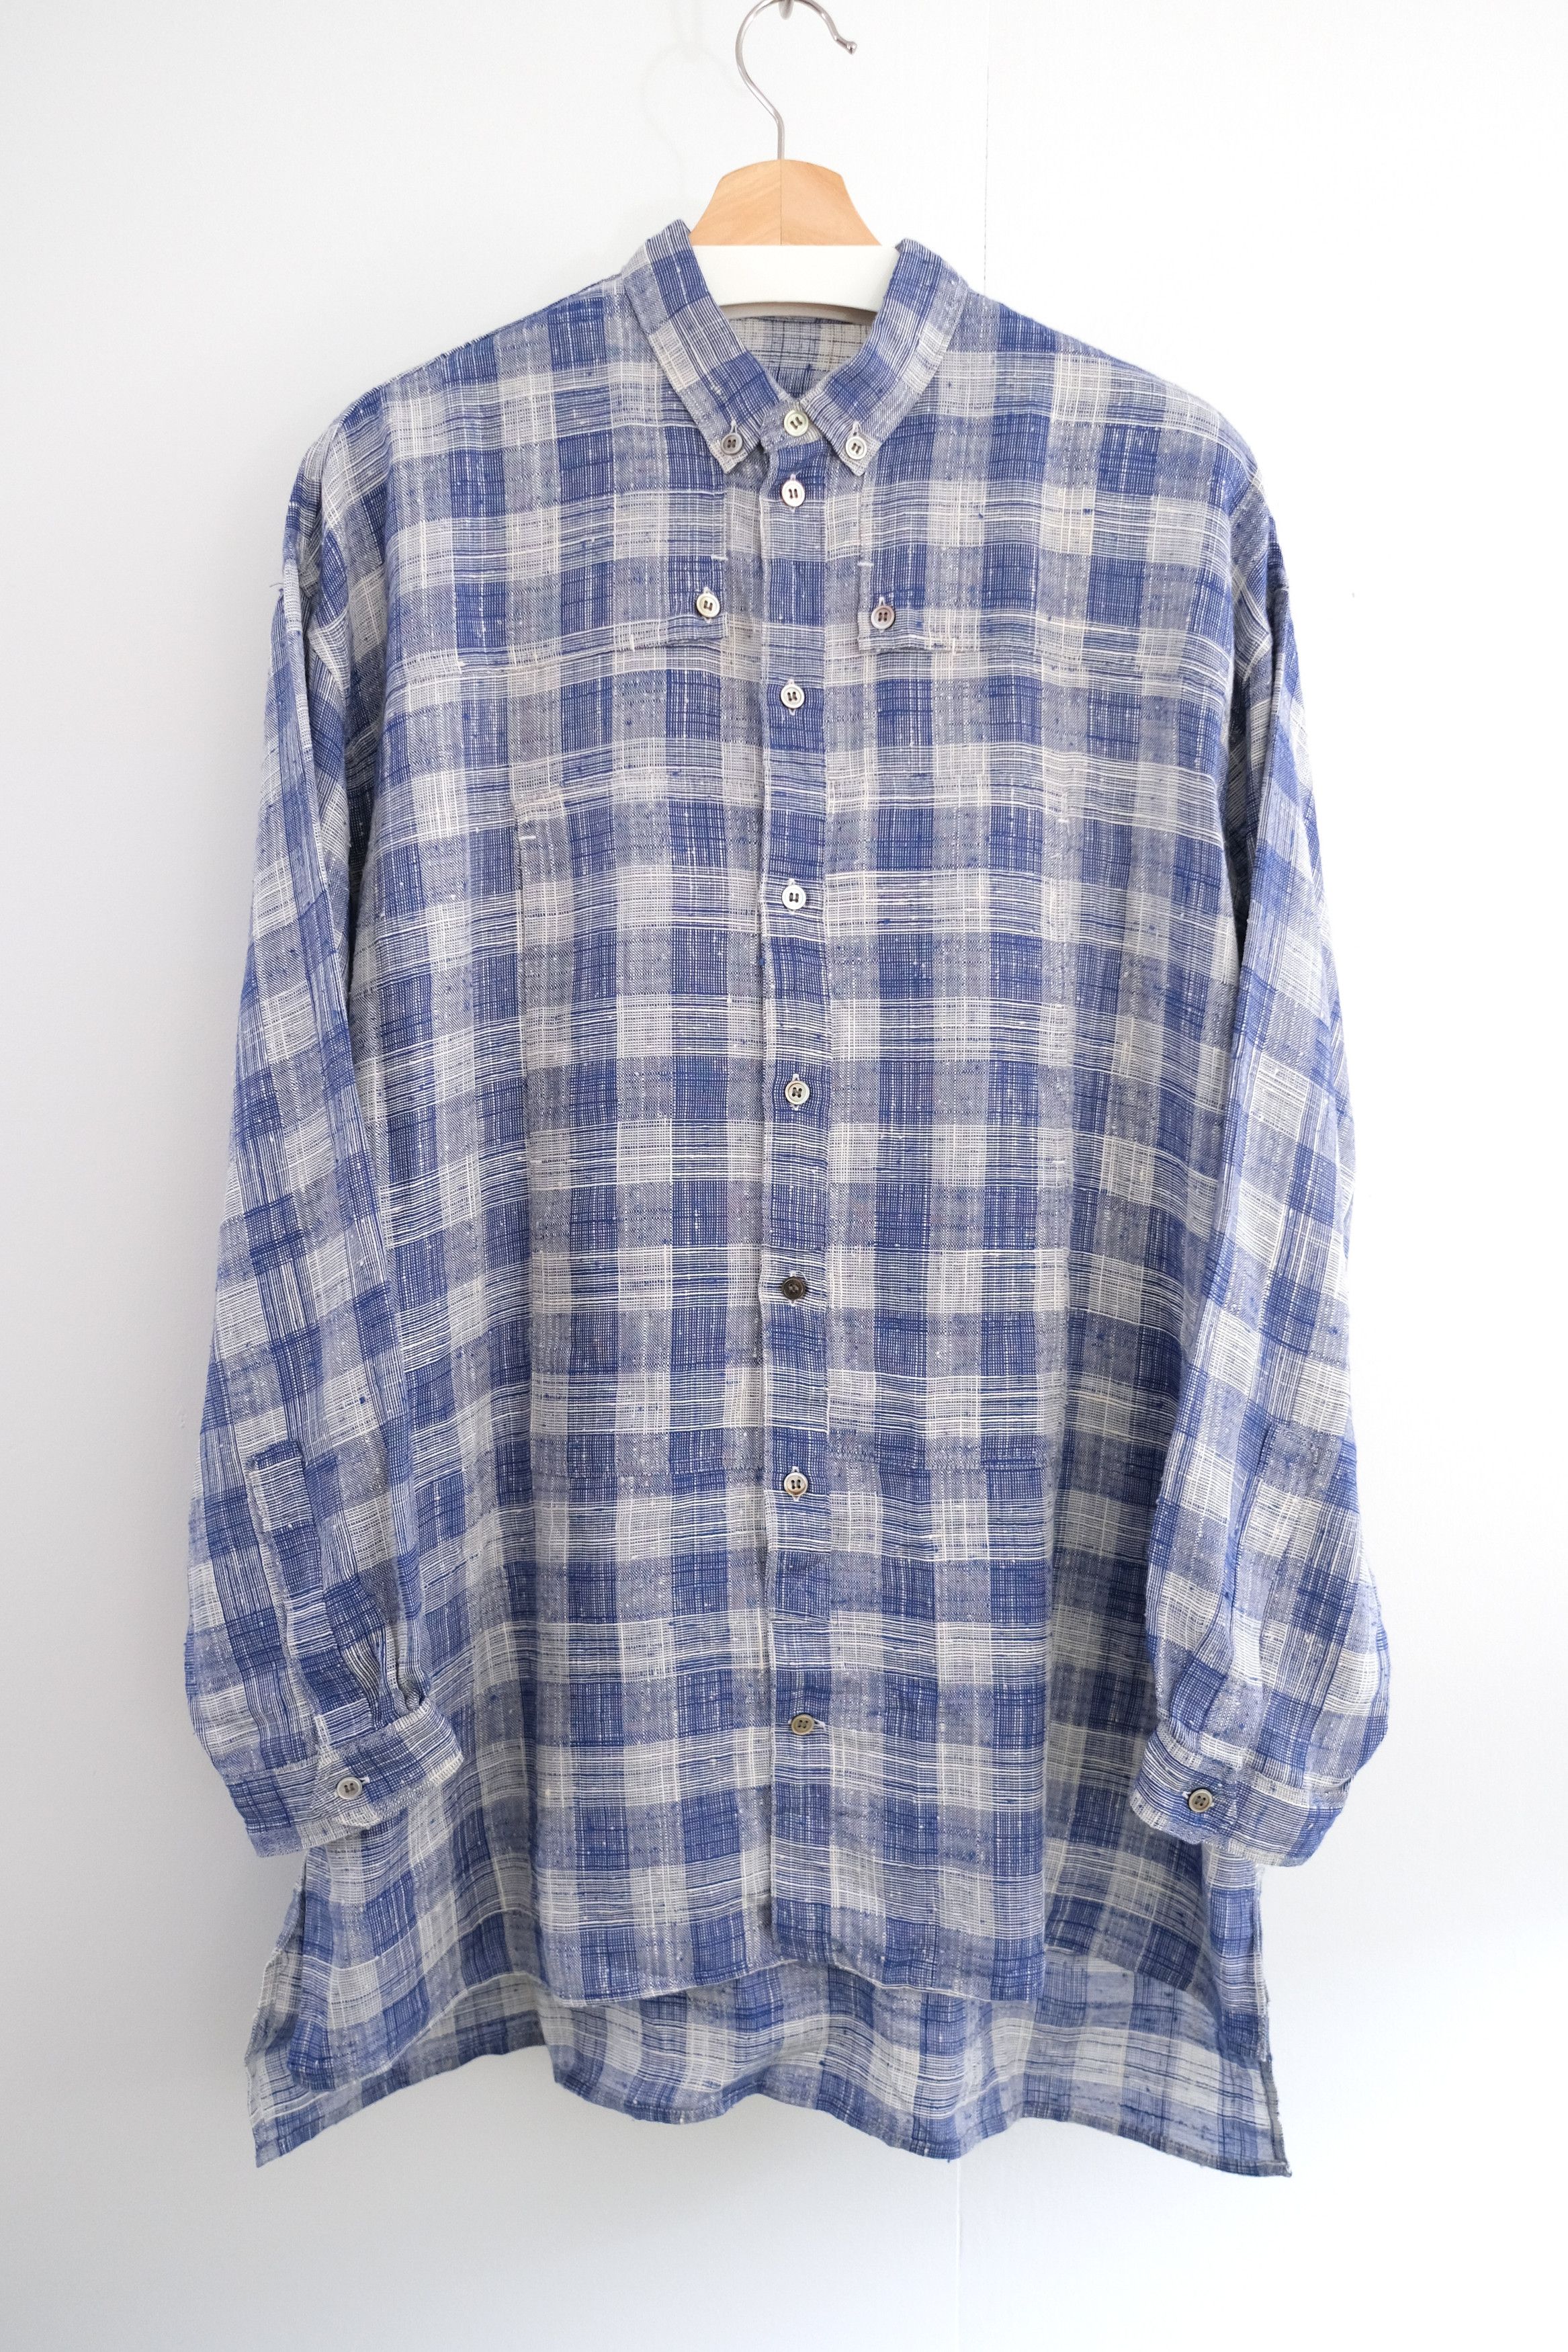 *SOLD* 🎐 YFM Archive [1970s-80s] Textured Plaid Shirt - 1